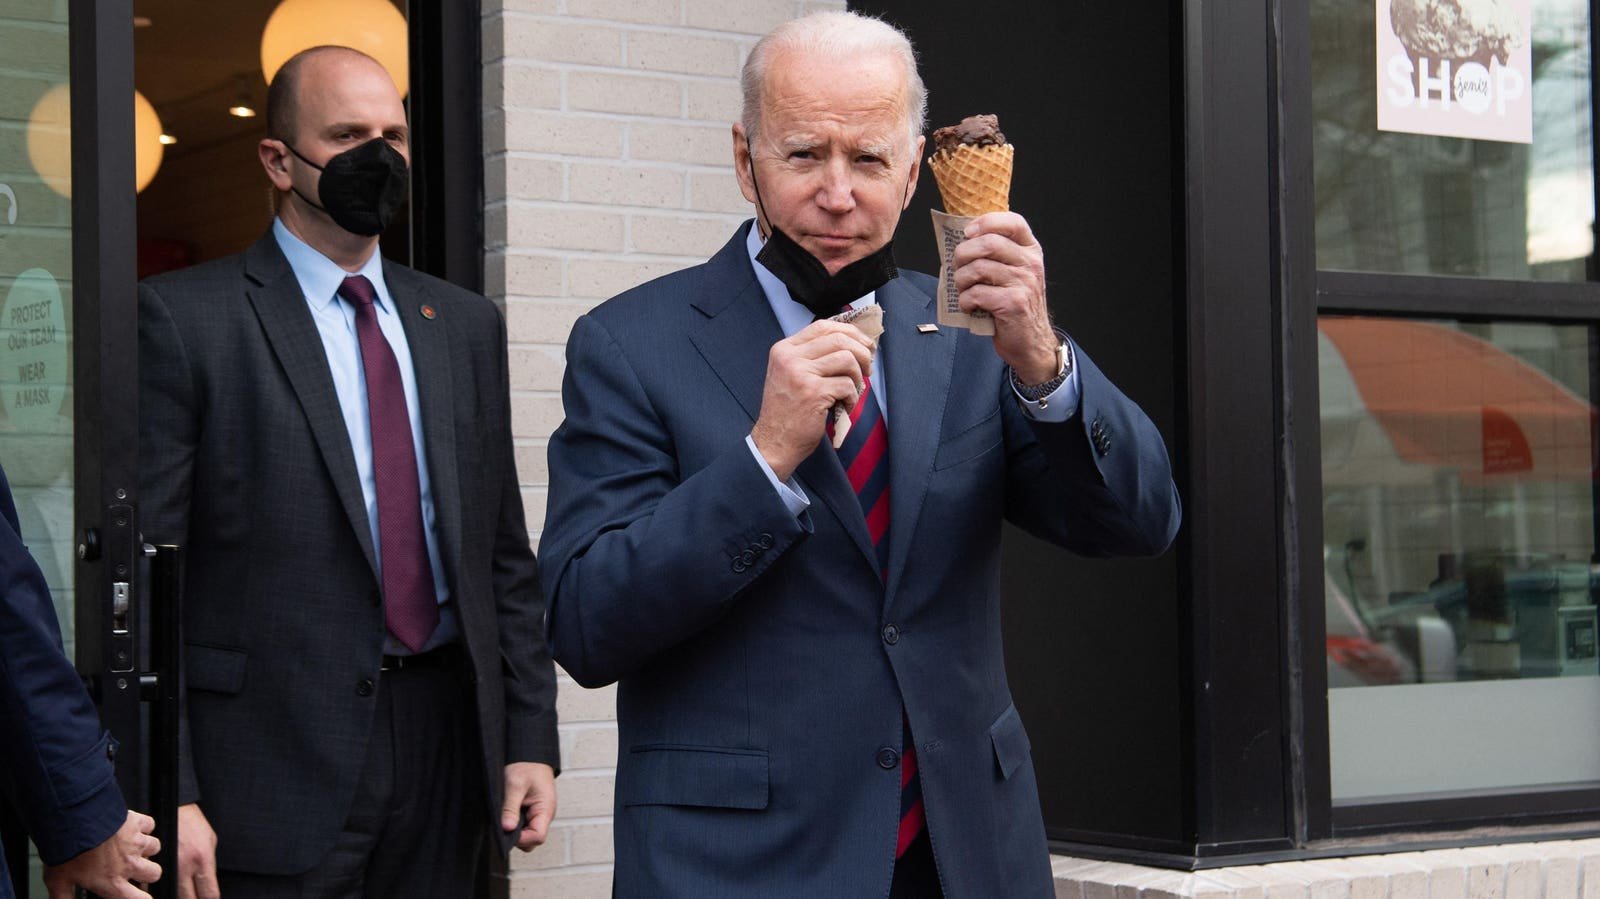 A Loaf Of Bread For 9 Cents: Here’s What Groceries Cost When Joe Biden Was Born